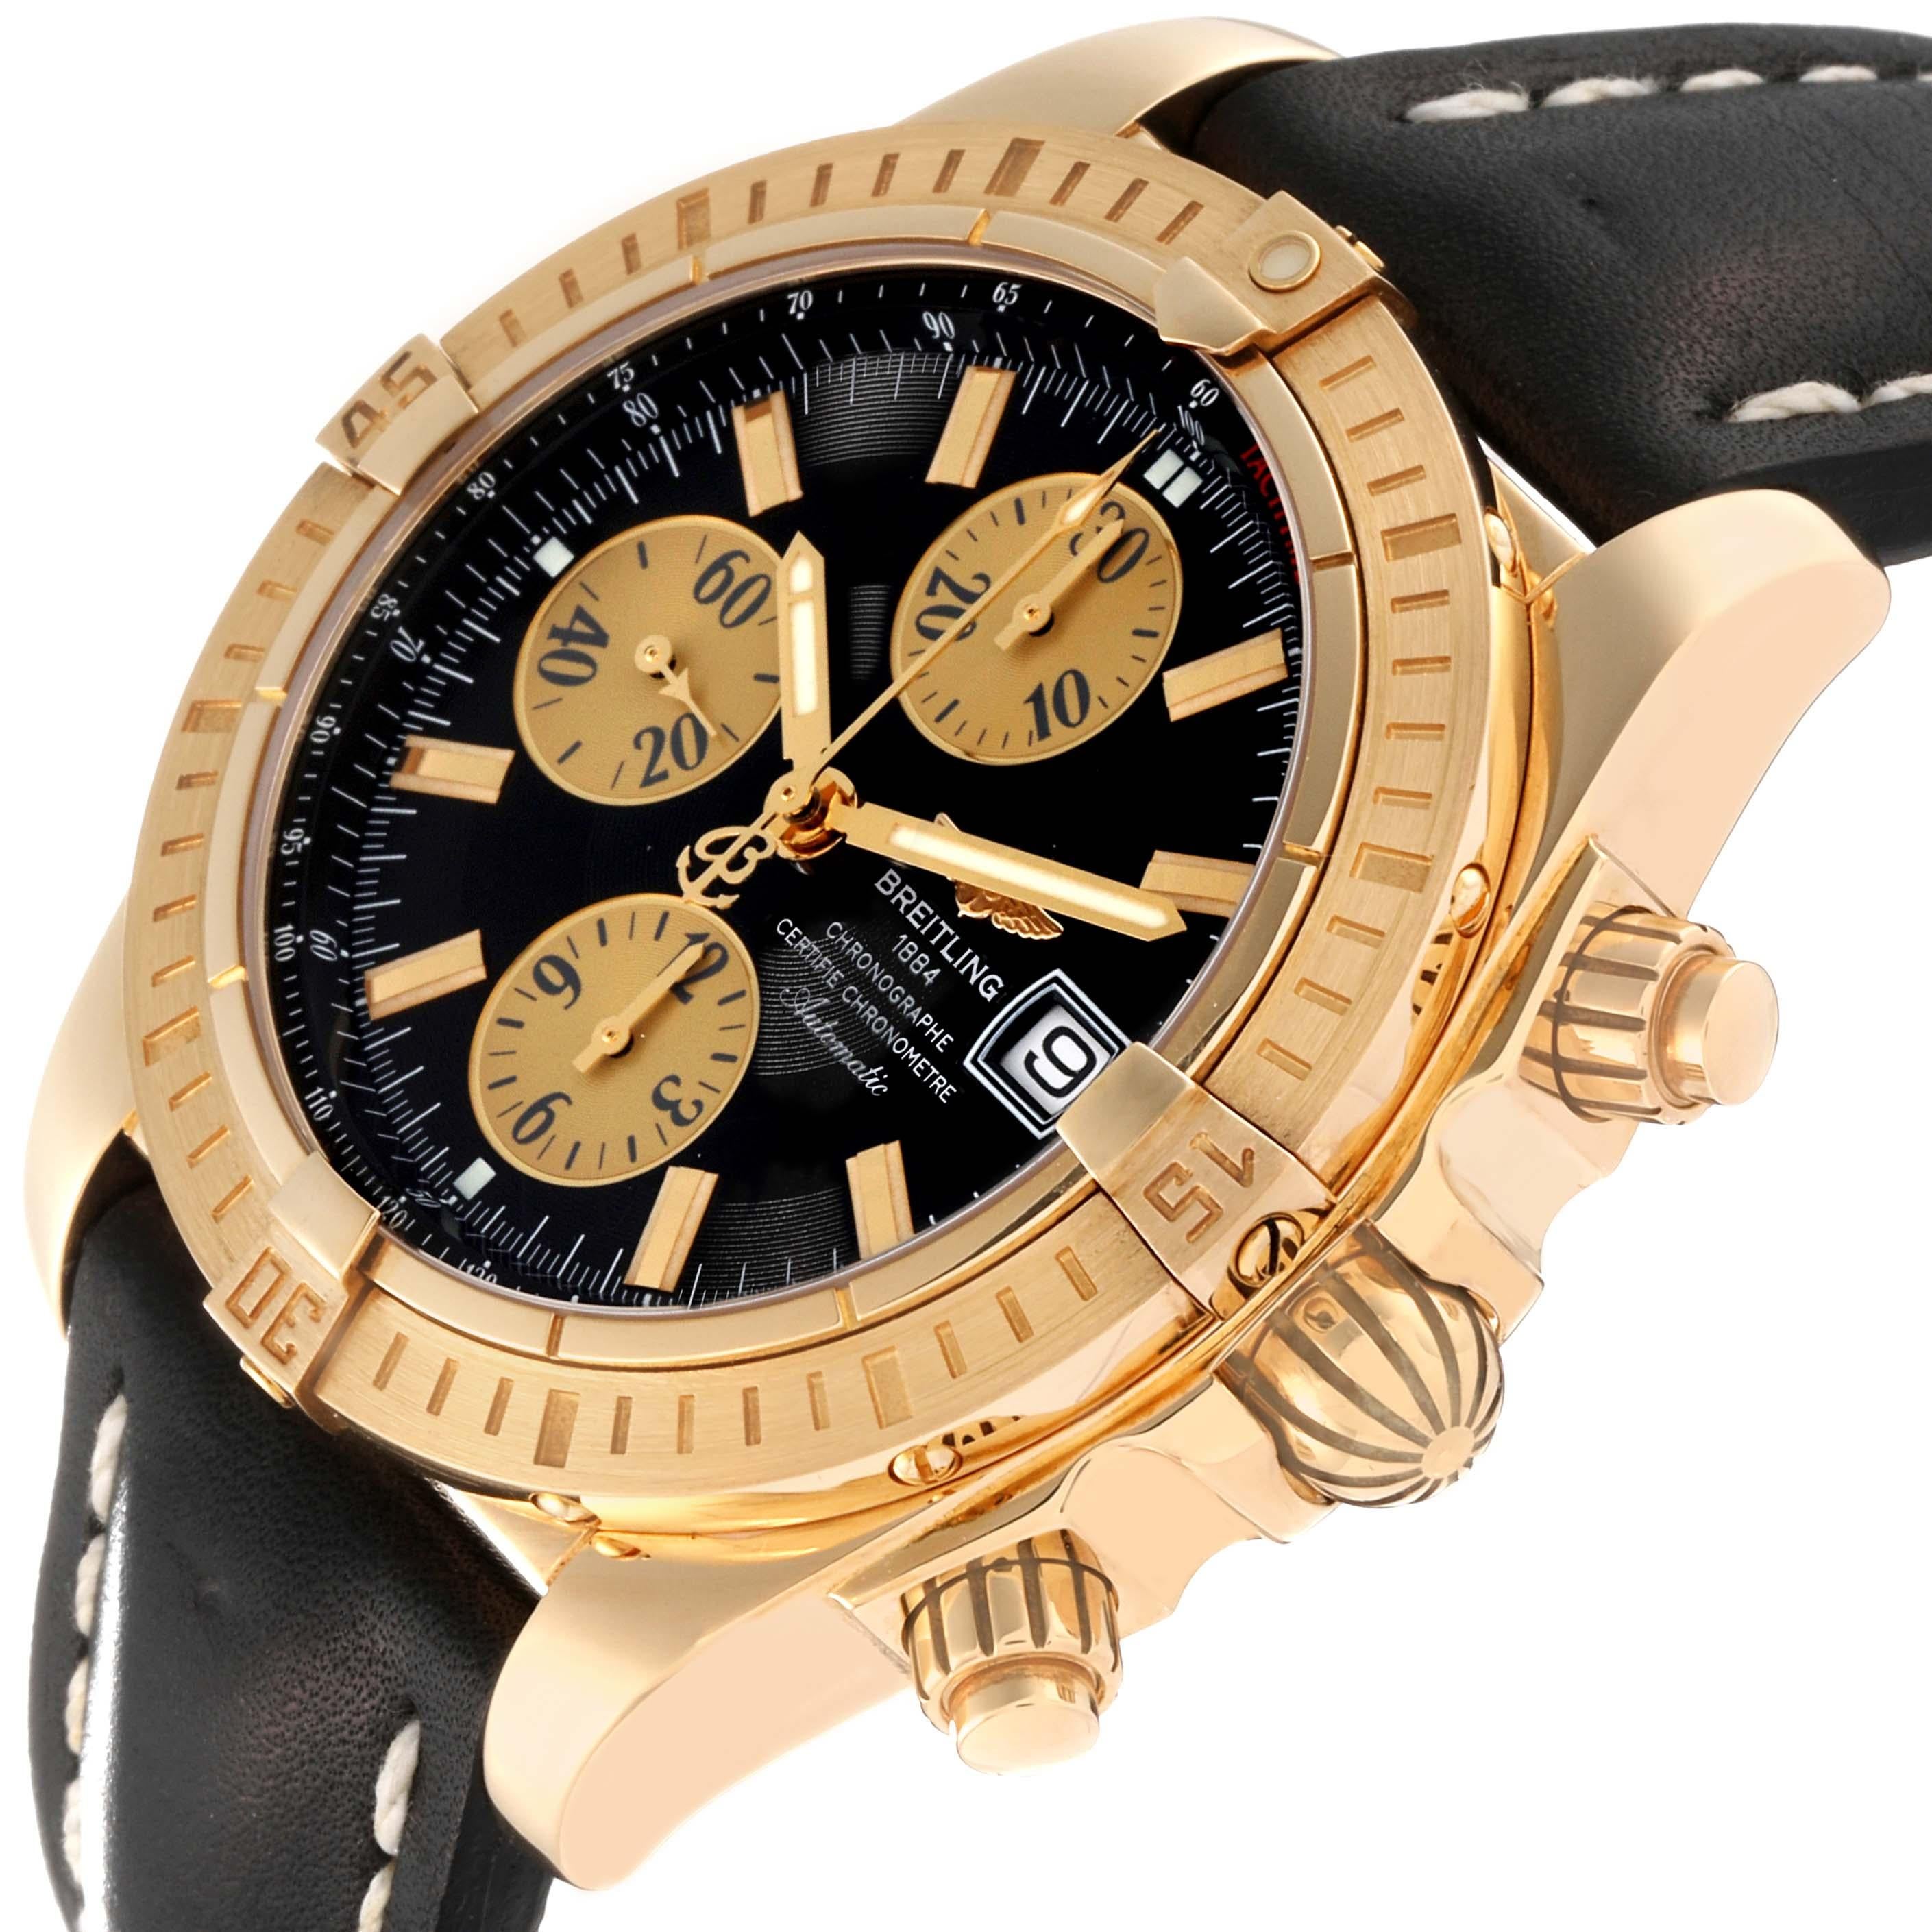 Breitling Chronomat Evolution Yellow Gold Mens Watch K13356 Box Papers. Automatic self-winding officially certified chronometer movement. Chronograph function. 18k yellow gold case 44 mm in diameter with screwed-down crown and pushers. 18k yellow